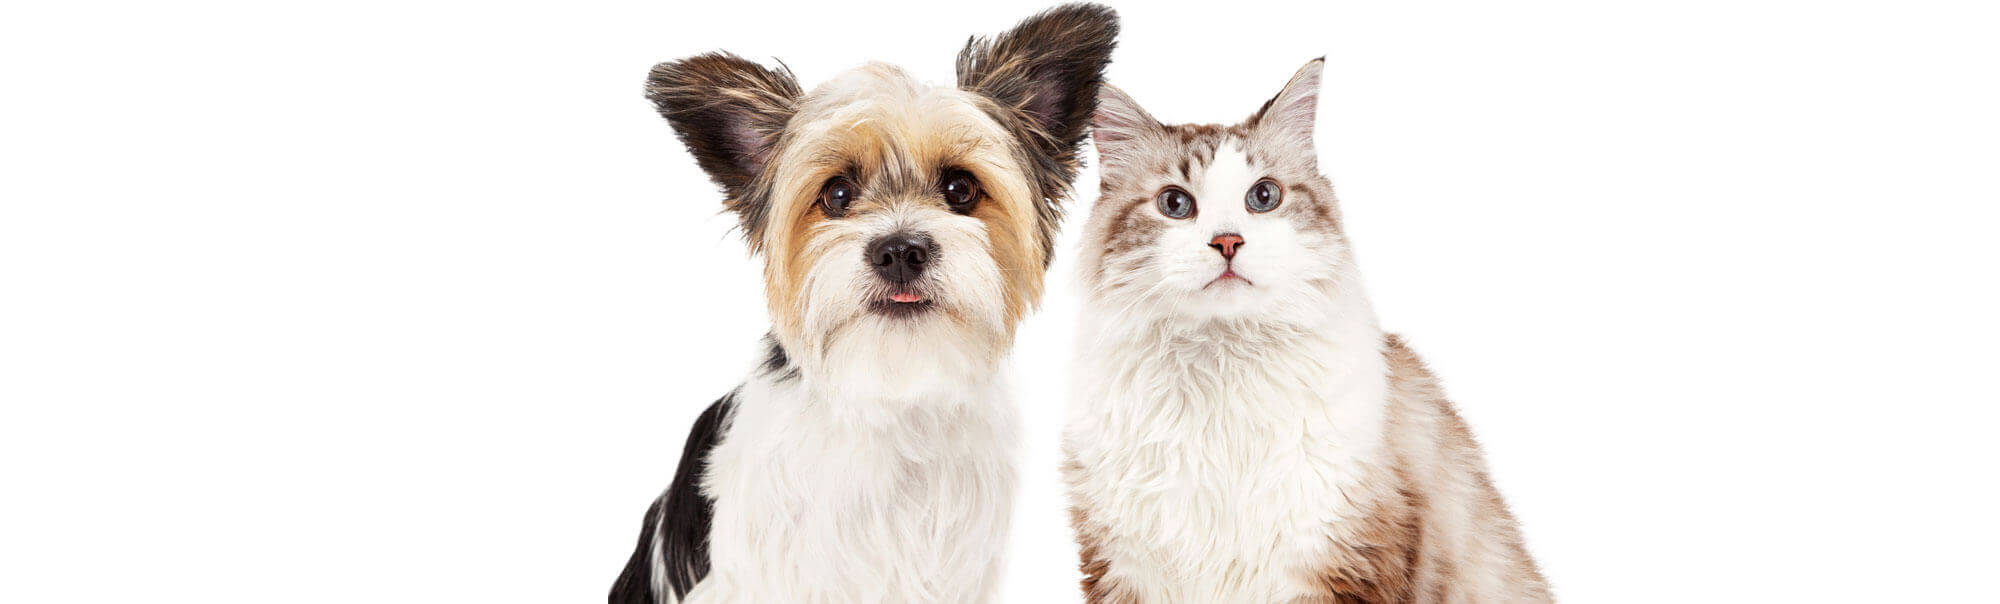 1 Pittsburgh Veterinary Dermatology Sees Dogs and Cats with Skin Problems